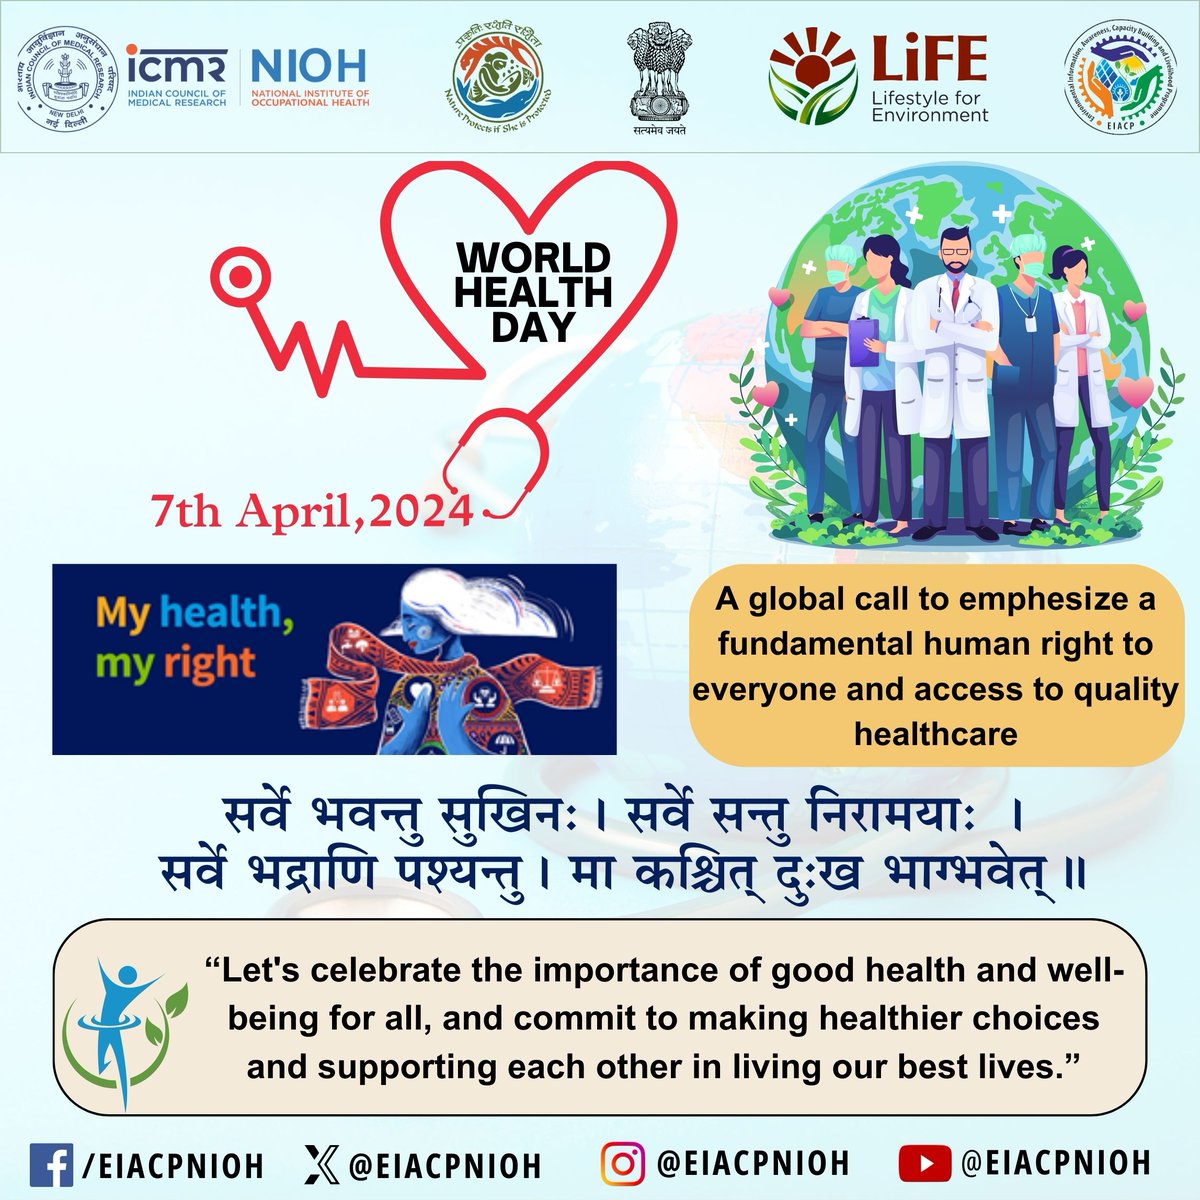 Let's celebrate the importance of good health and well-being for all, and commit to making healthier choices. @EIACPIndia @moefcc @icmrnioh @ICMRDELHI @GujHFWDept @MoHFW_INDIA #WorldHealthDay #MyHealthMyRight